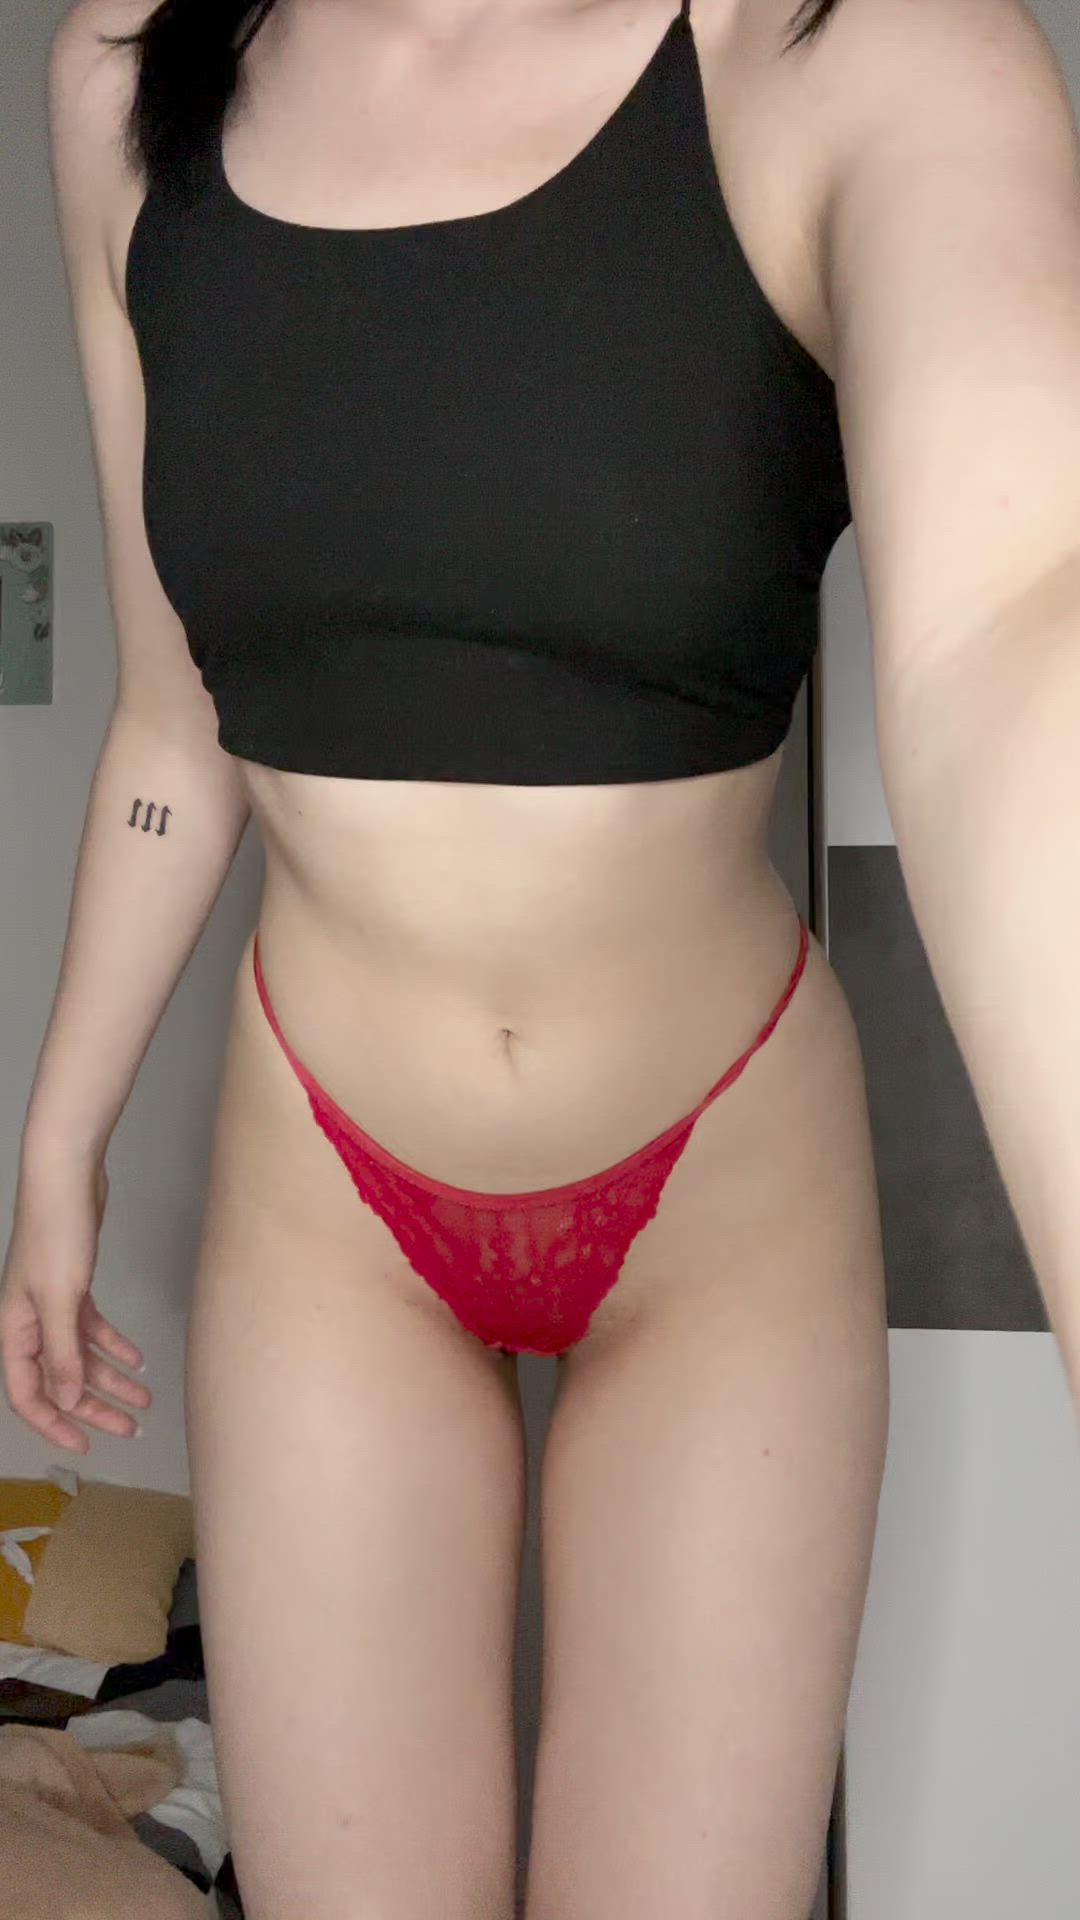 Pussy porn video with onlyfans model Marie Dny <strong>@marie_dny</strong>